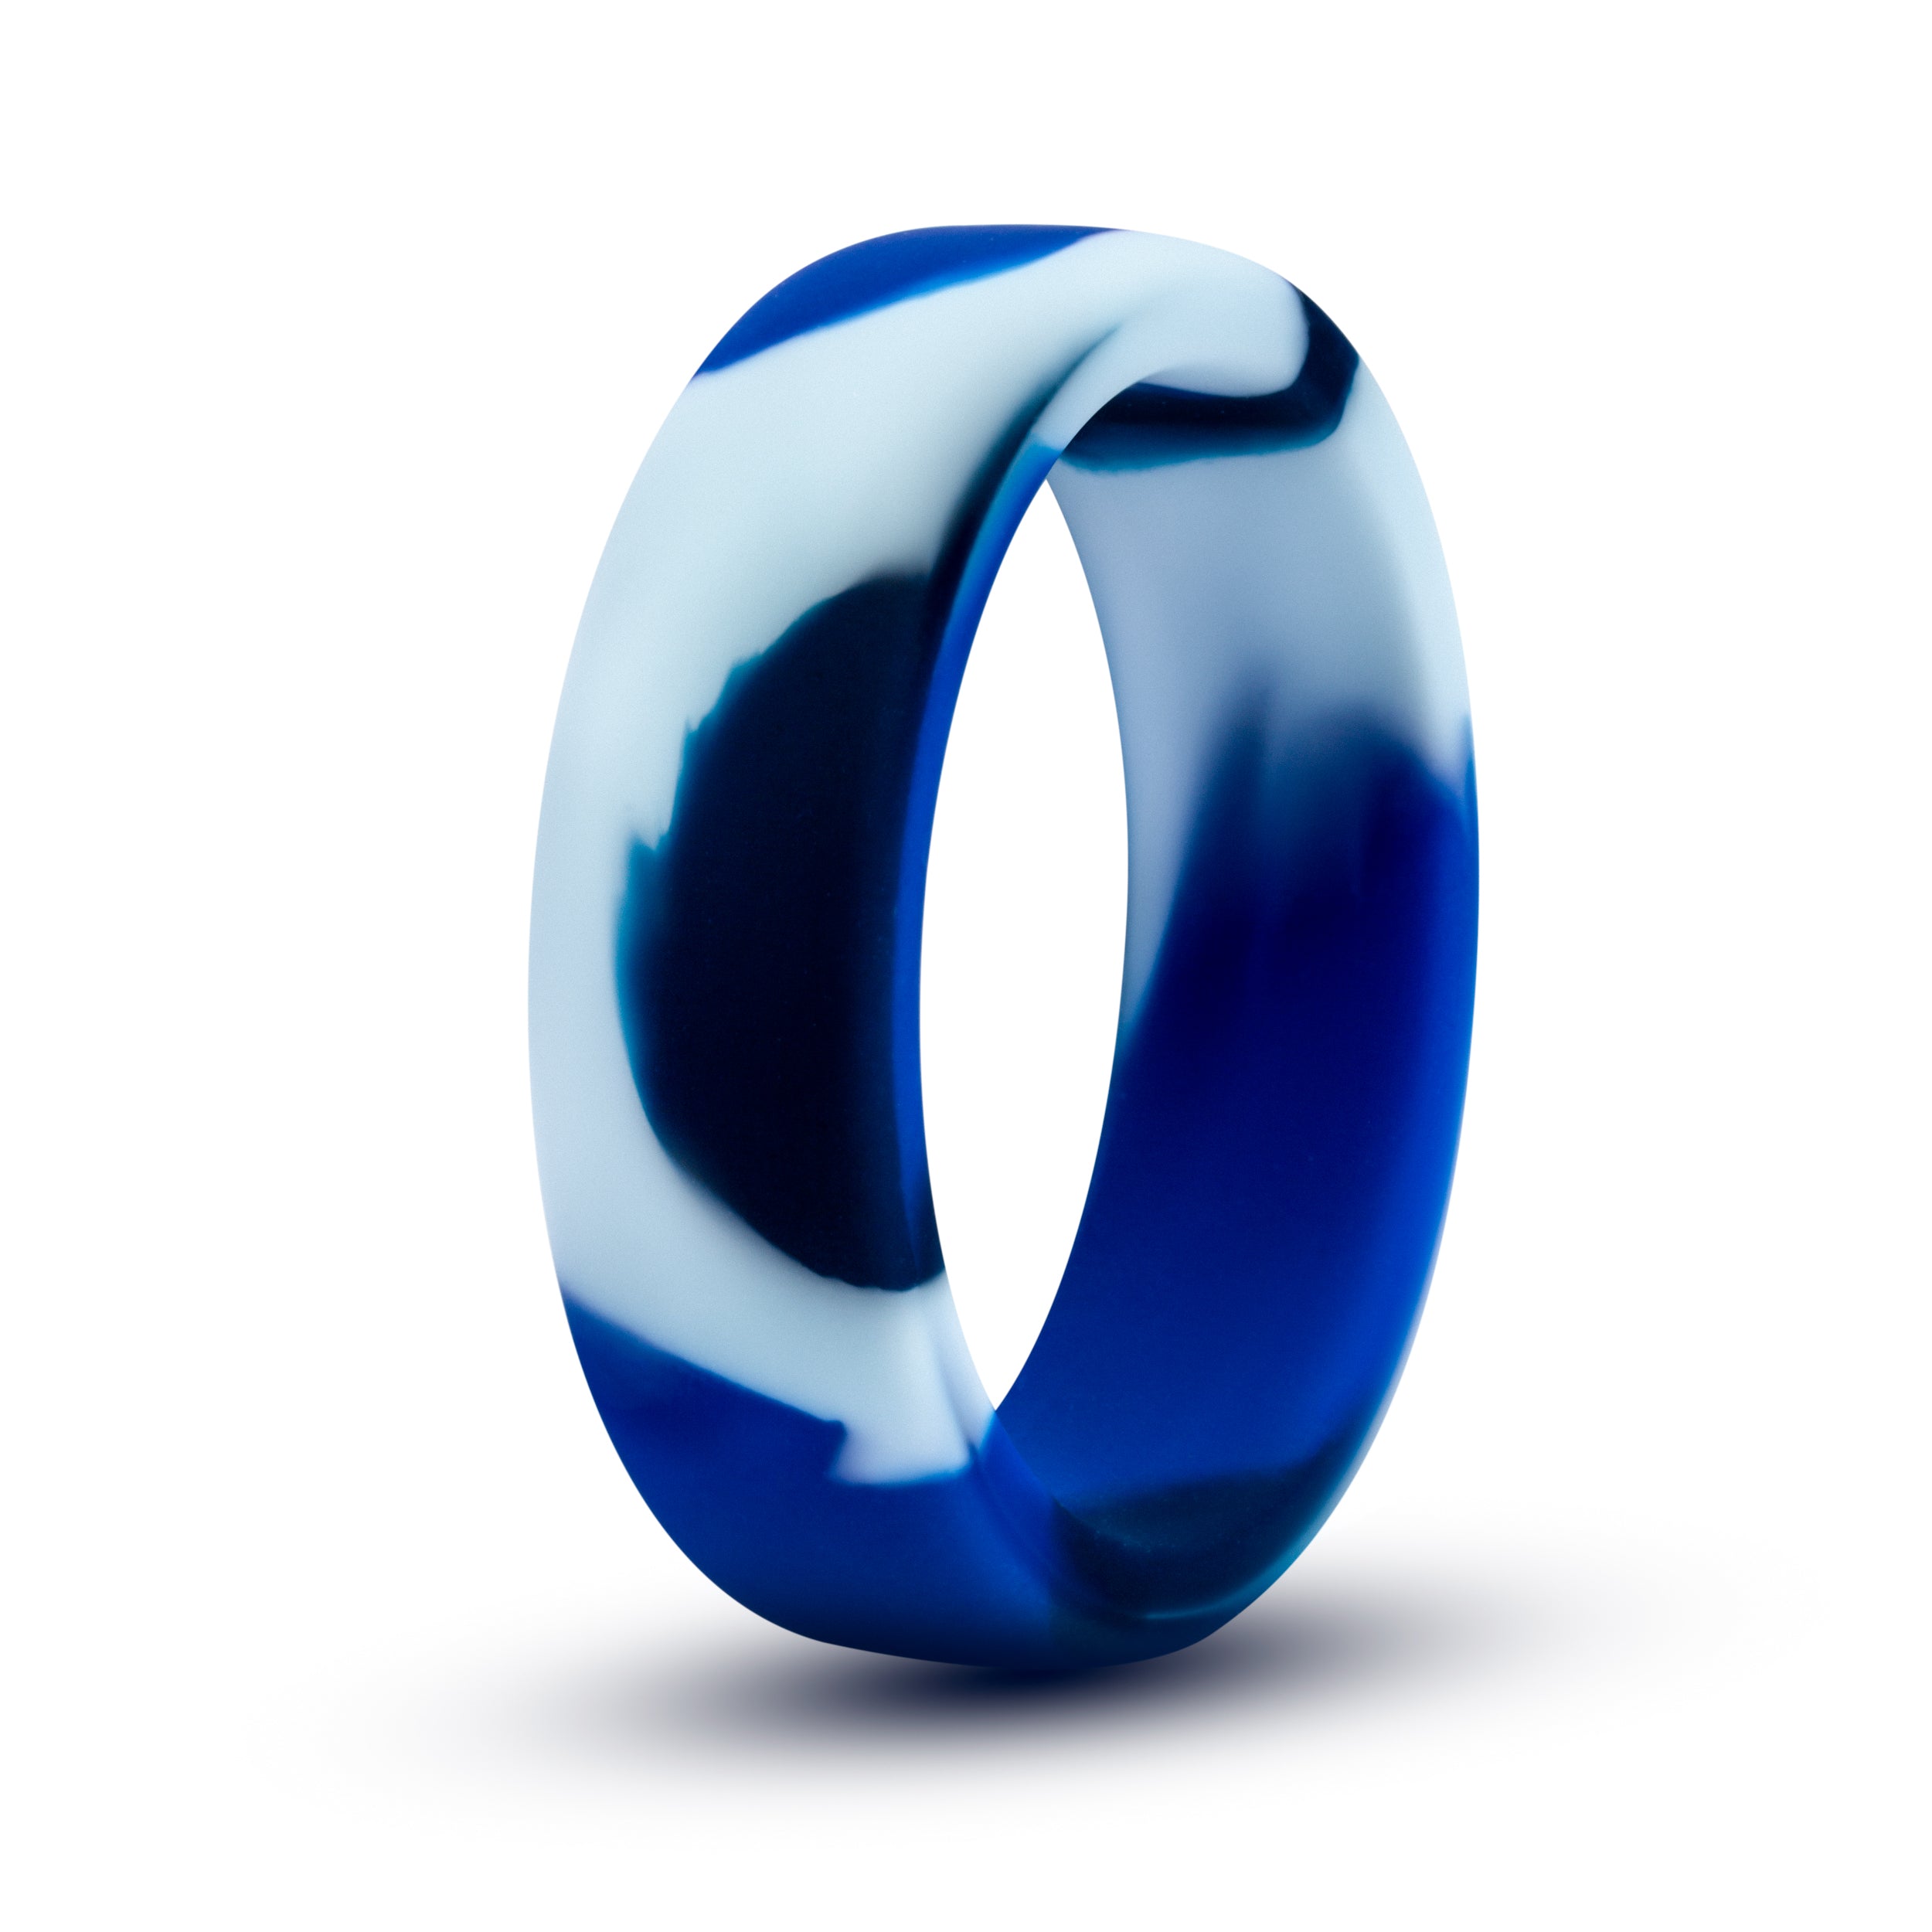 Performance Silicone Camo Cock Ring Blue Camoflauge